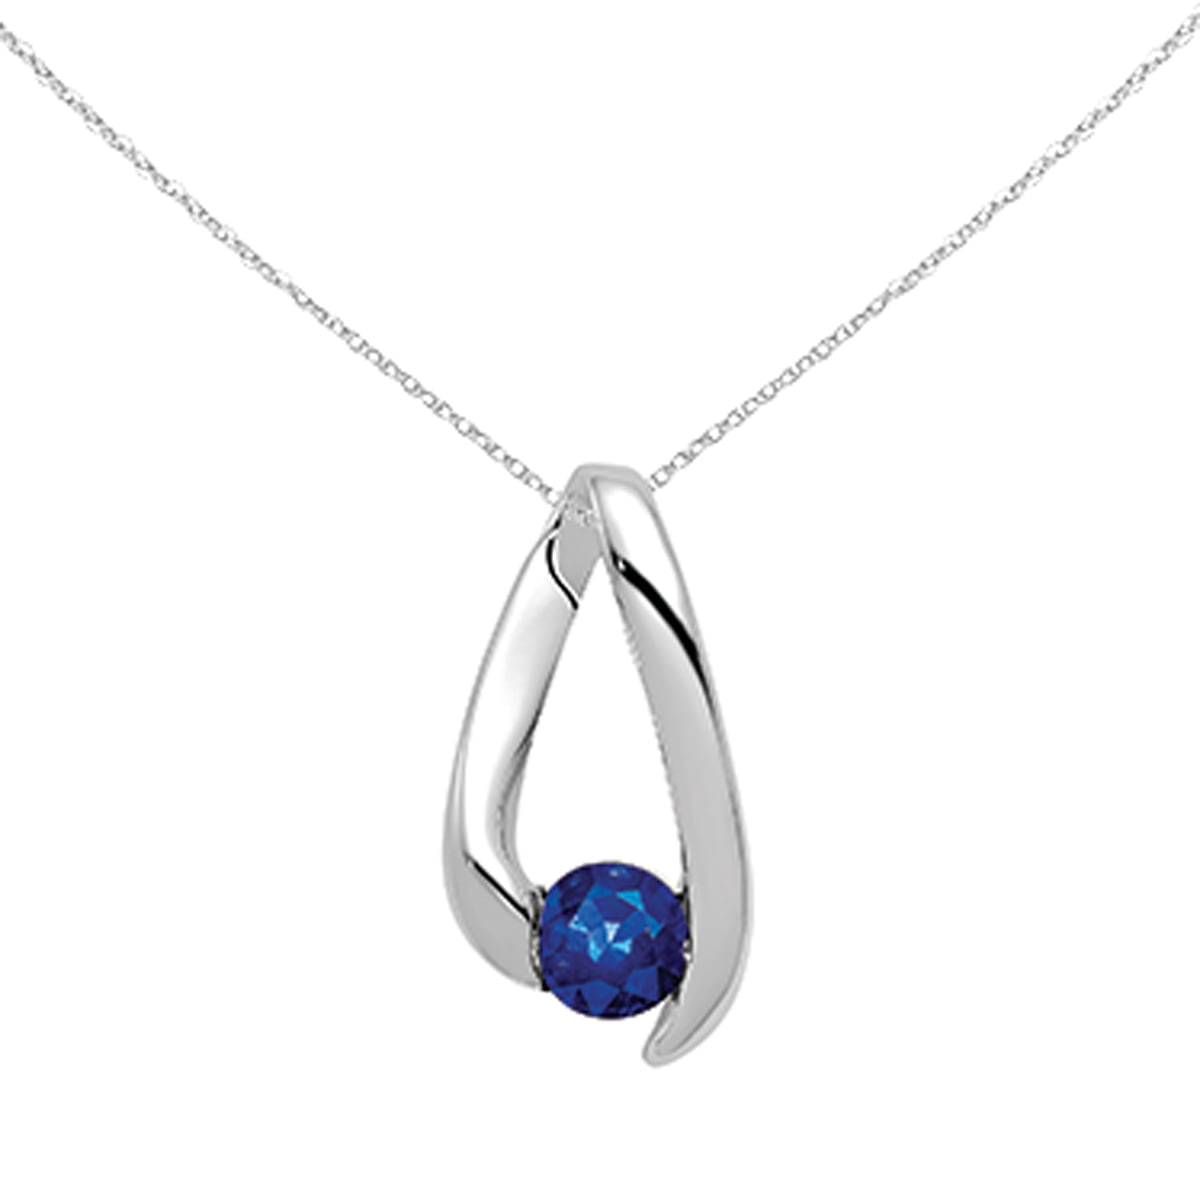 14k White Gold 4mm Blue Tanzanite Pendant Charm Necklace Slide Gemstone Chain Fine Jewelry For Women Gifts For Her